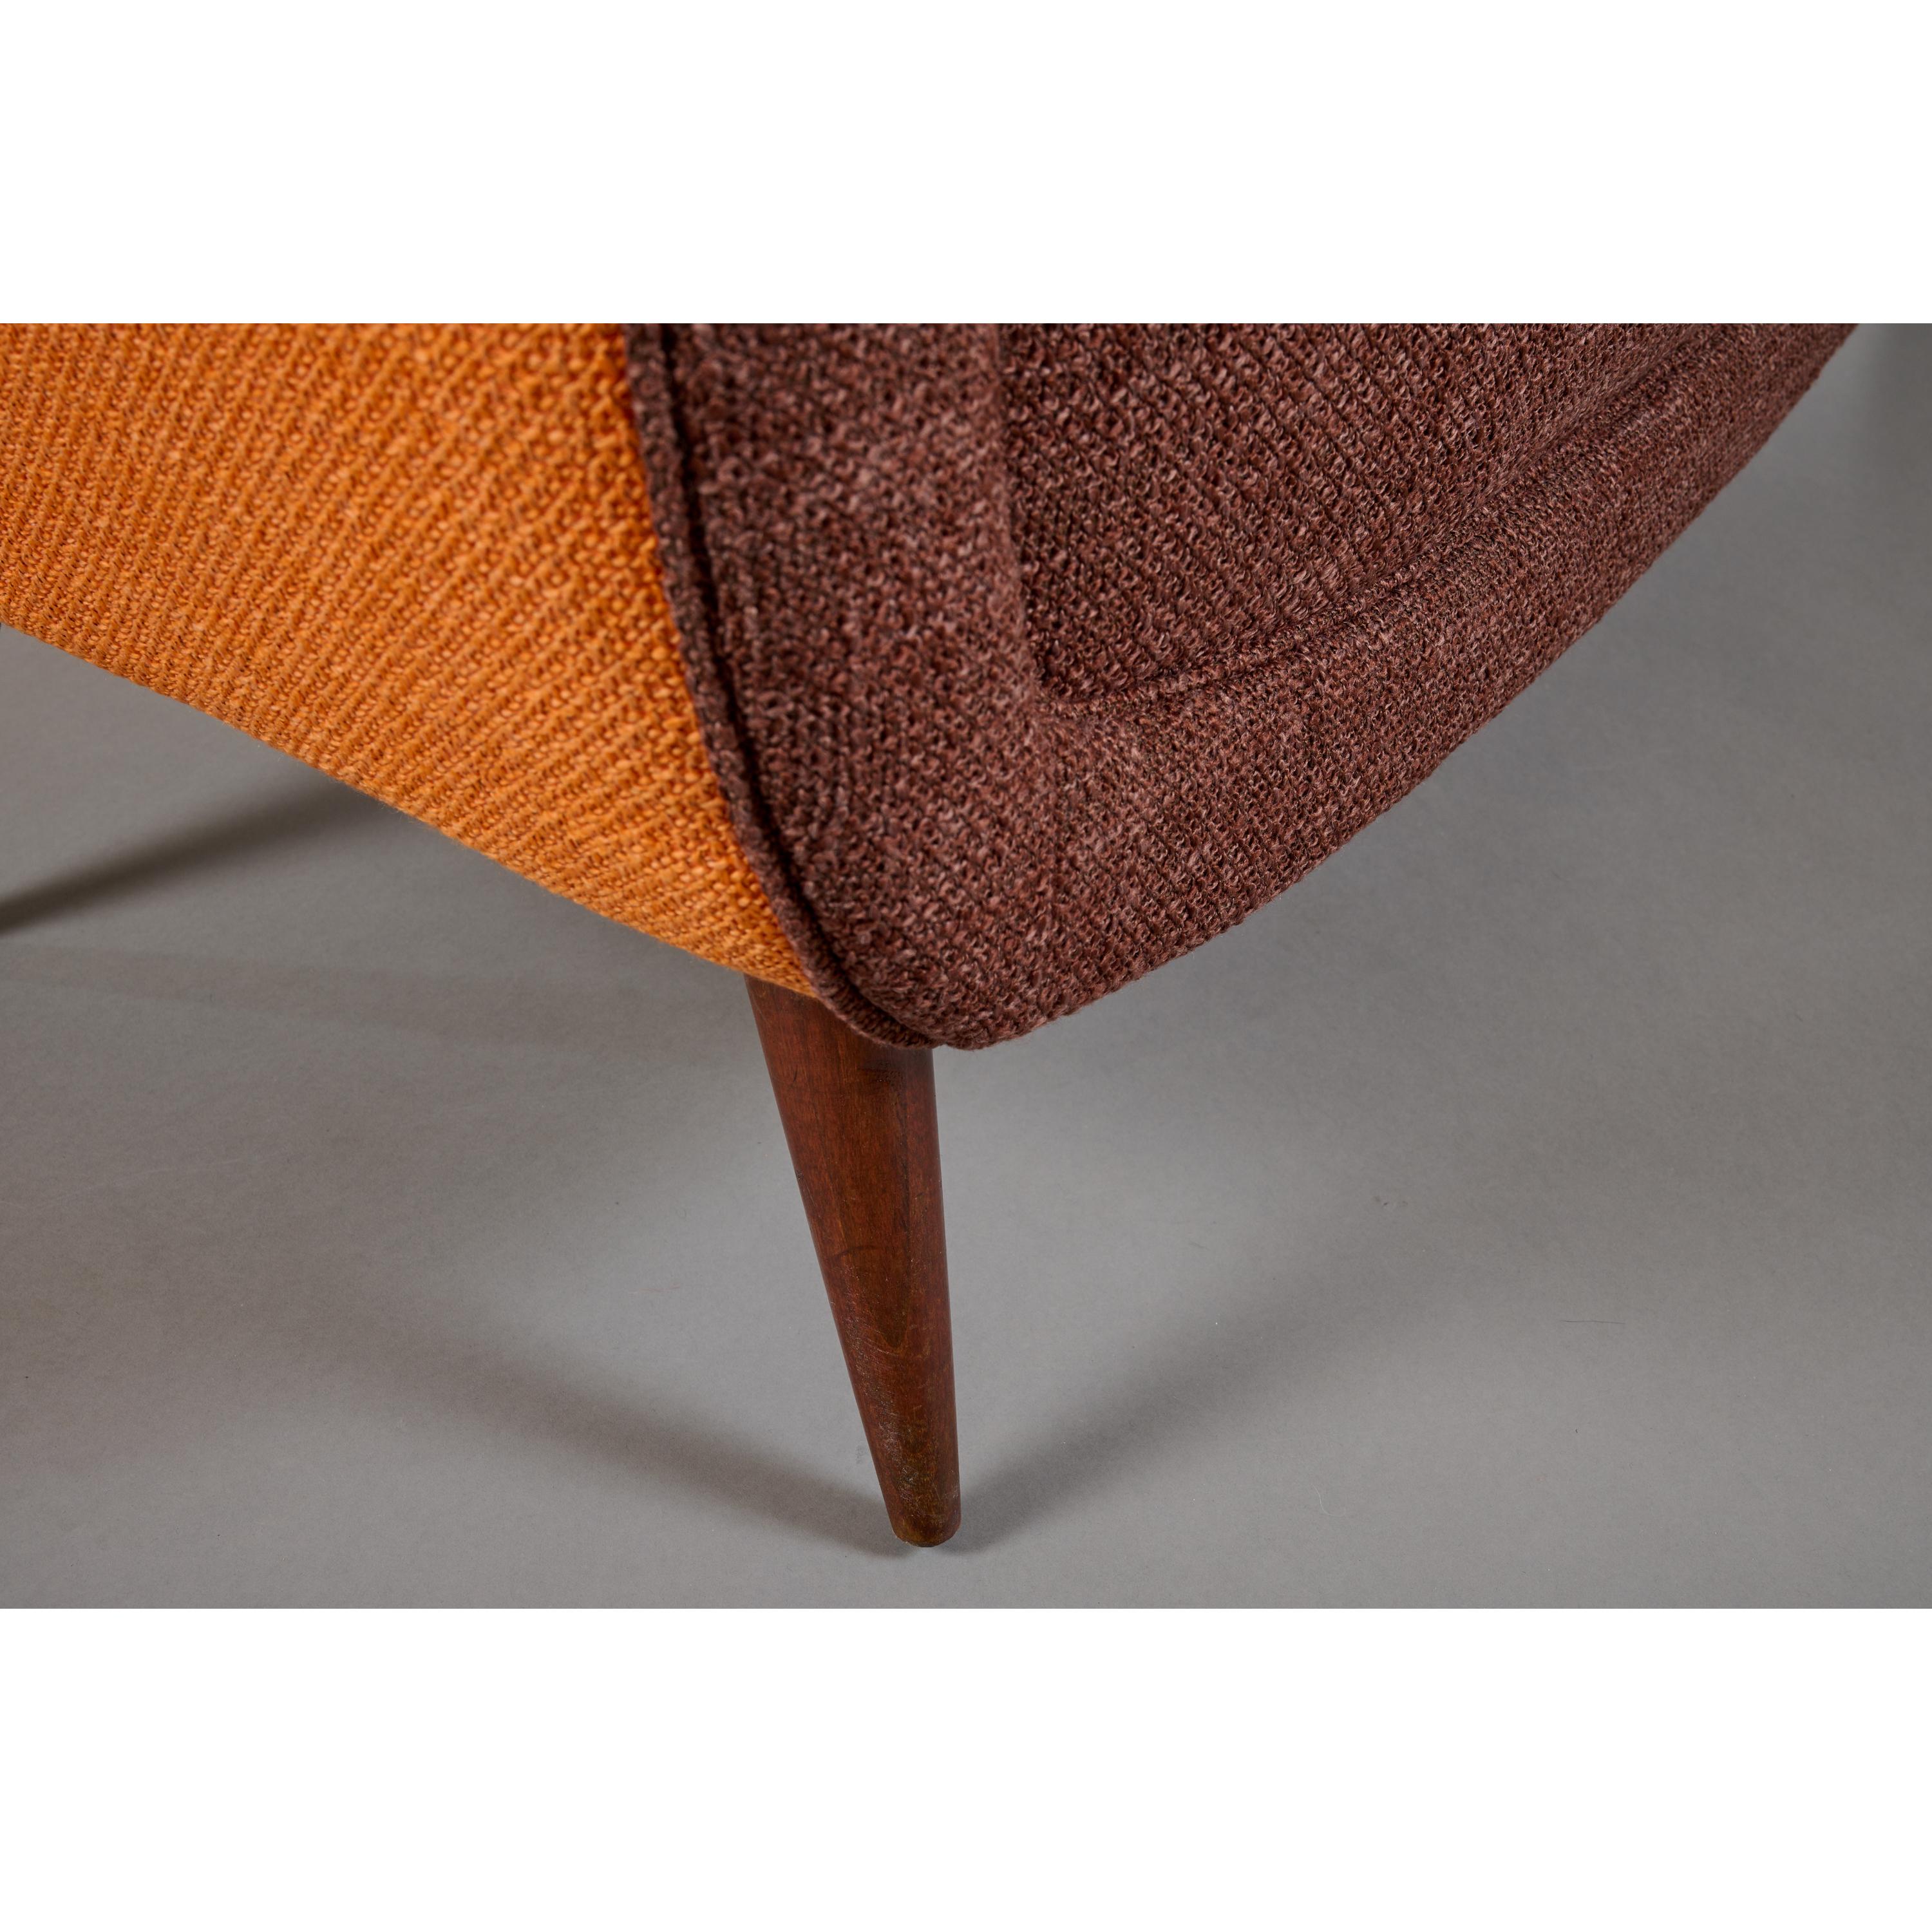 Curved ITSO Federico Munari Settee in Wood with Orange Upholstery, Italy 1950s  For Sale 7